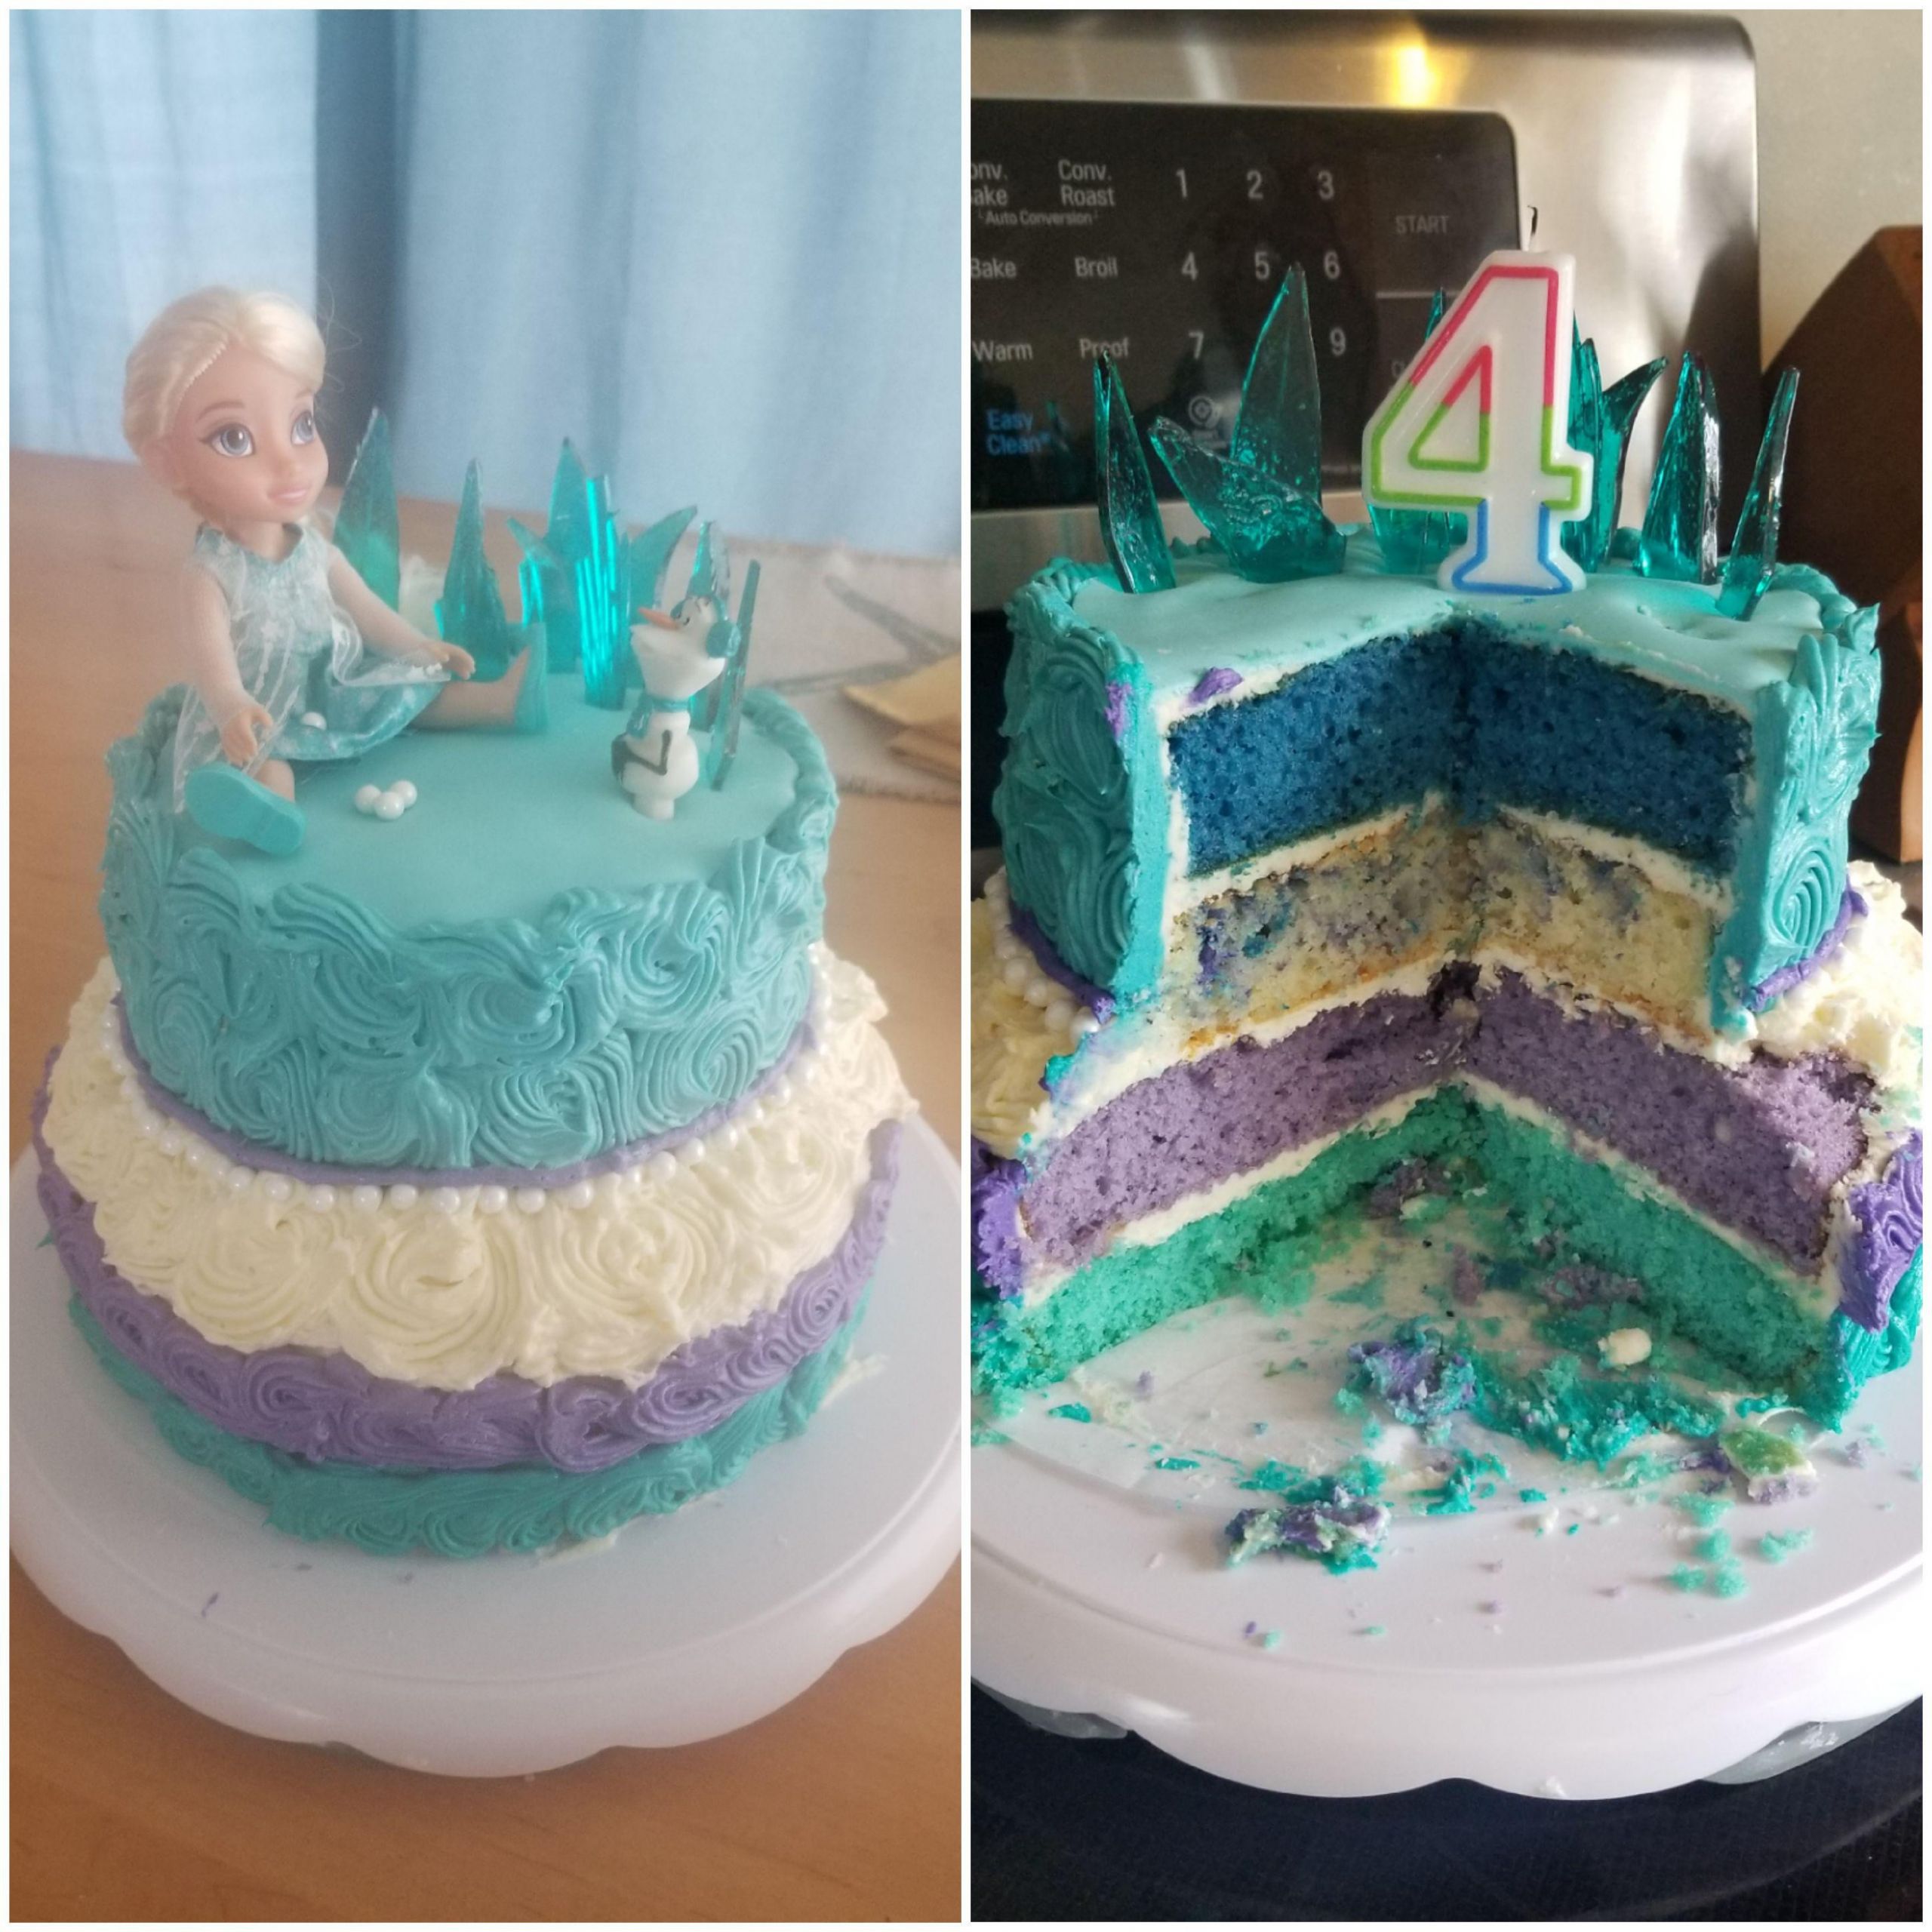 Elsa Birthday Cakes
 [Homemade] Elsa cake for my youngest daughters 4th